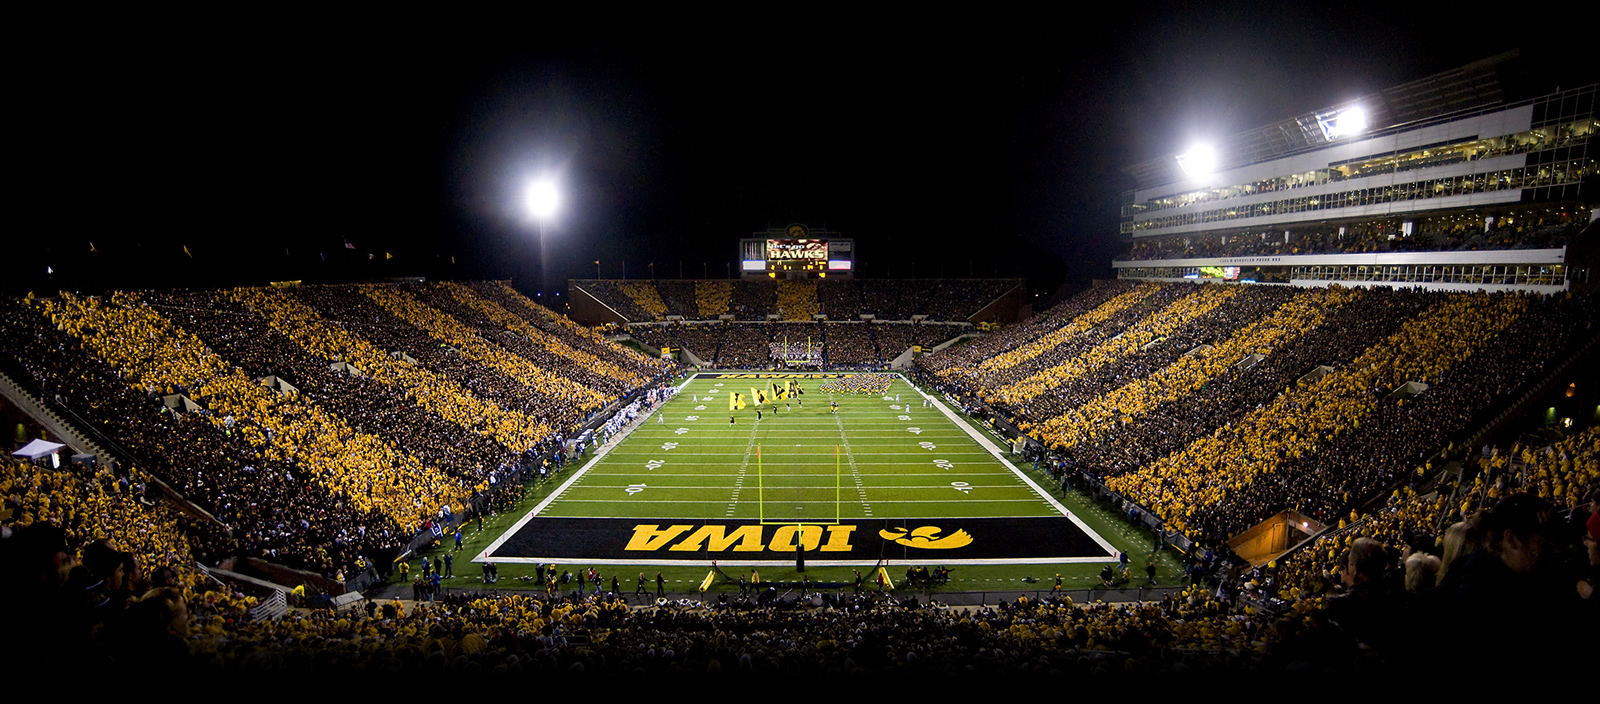 Free download Iowa Hawkeyes Football Schedule 2013 The career leader at